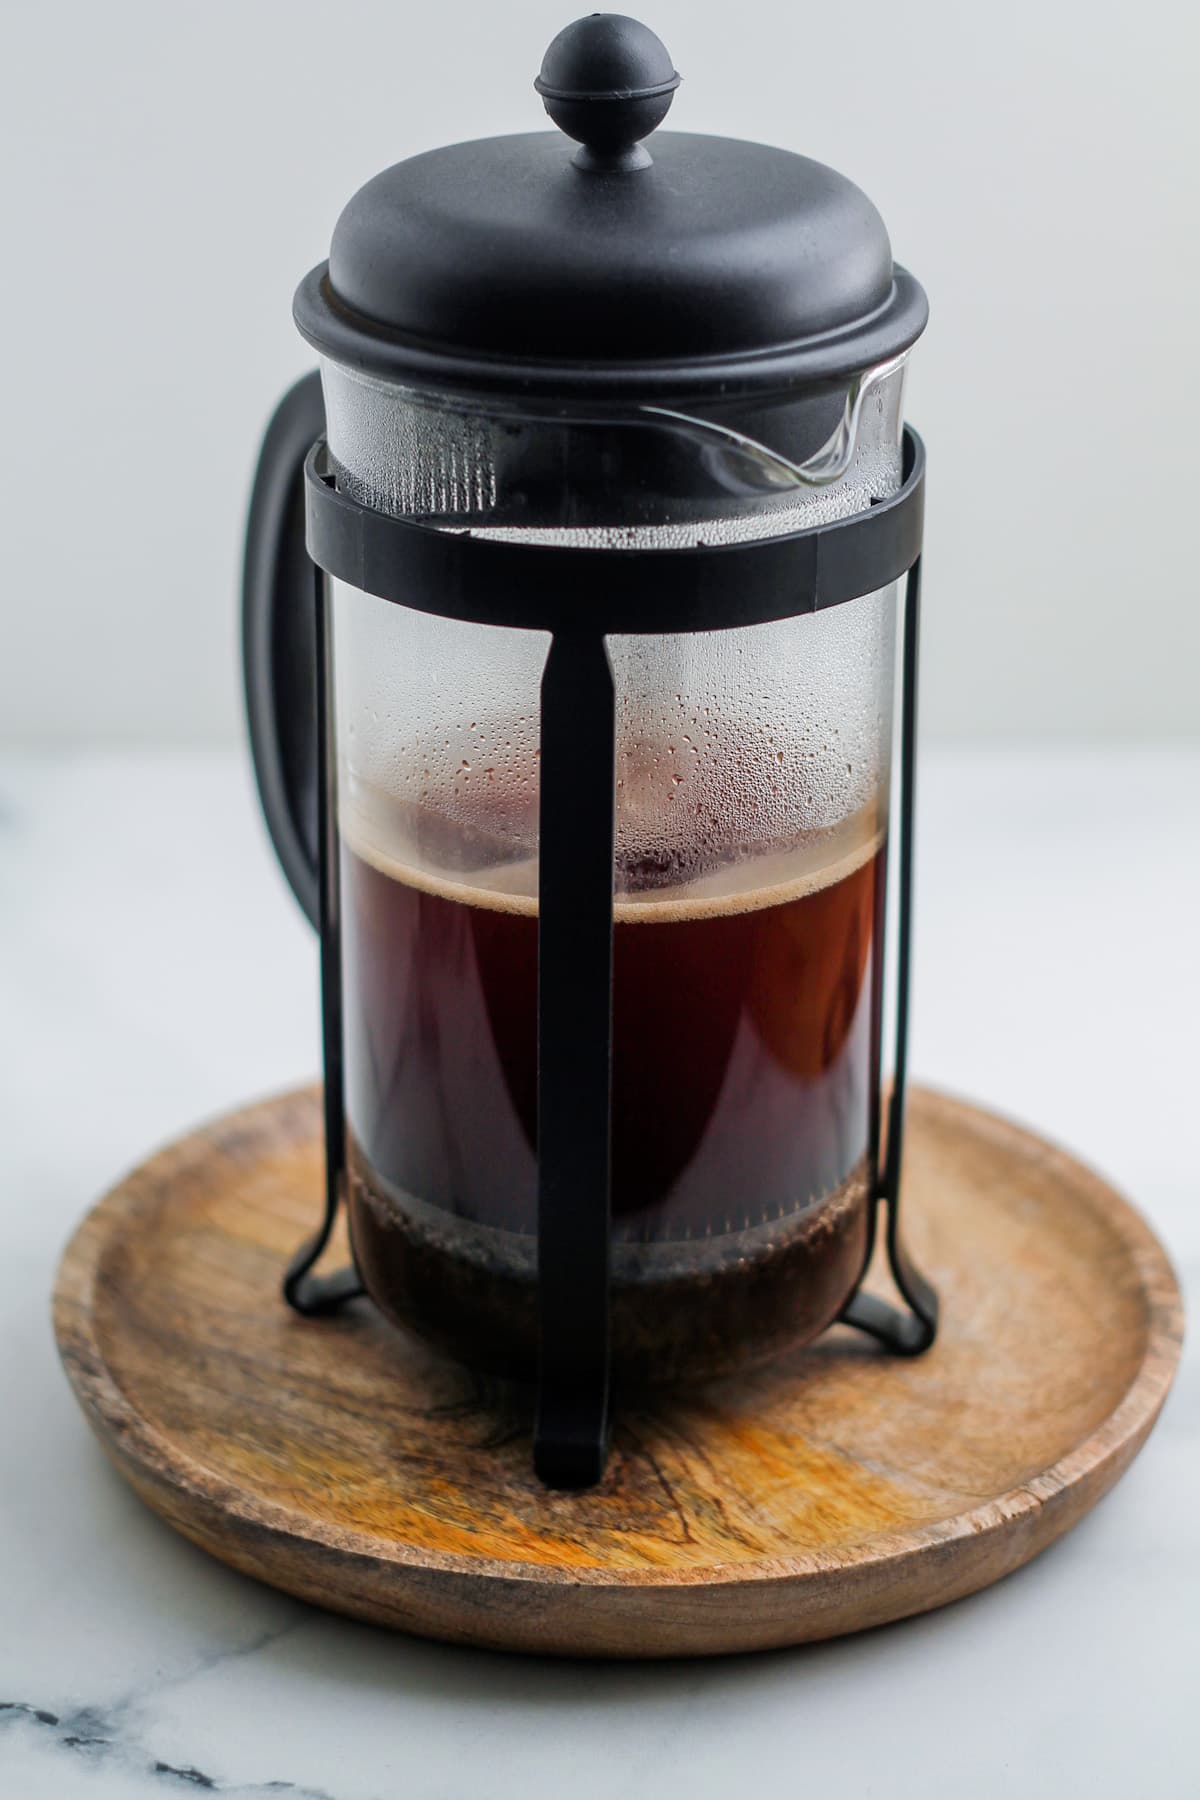 A french press with coffee brewing inside it.